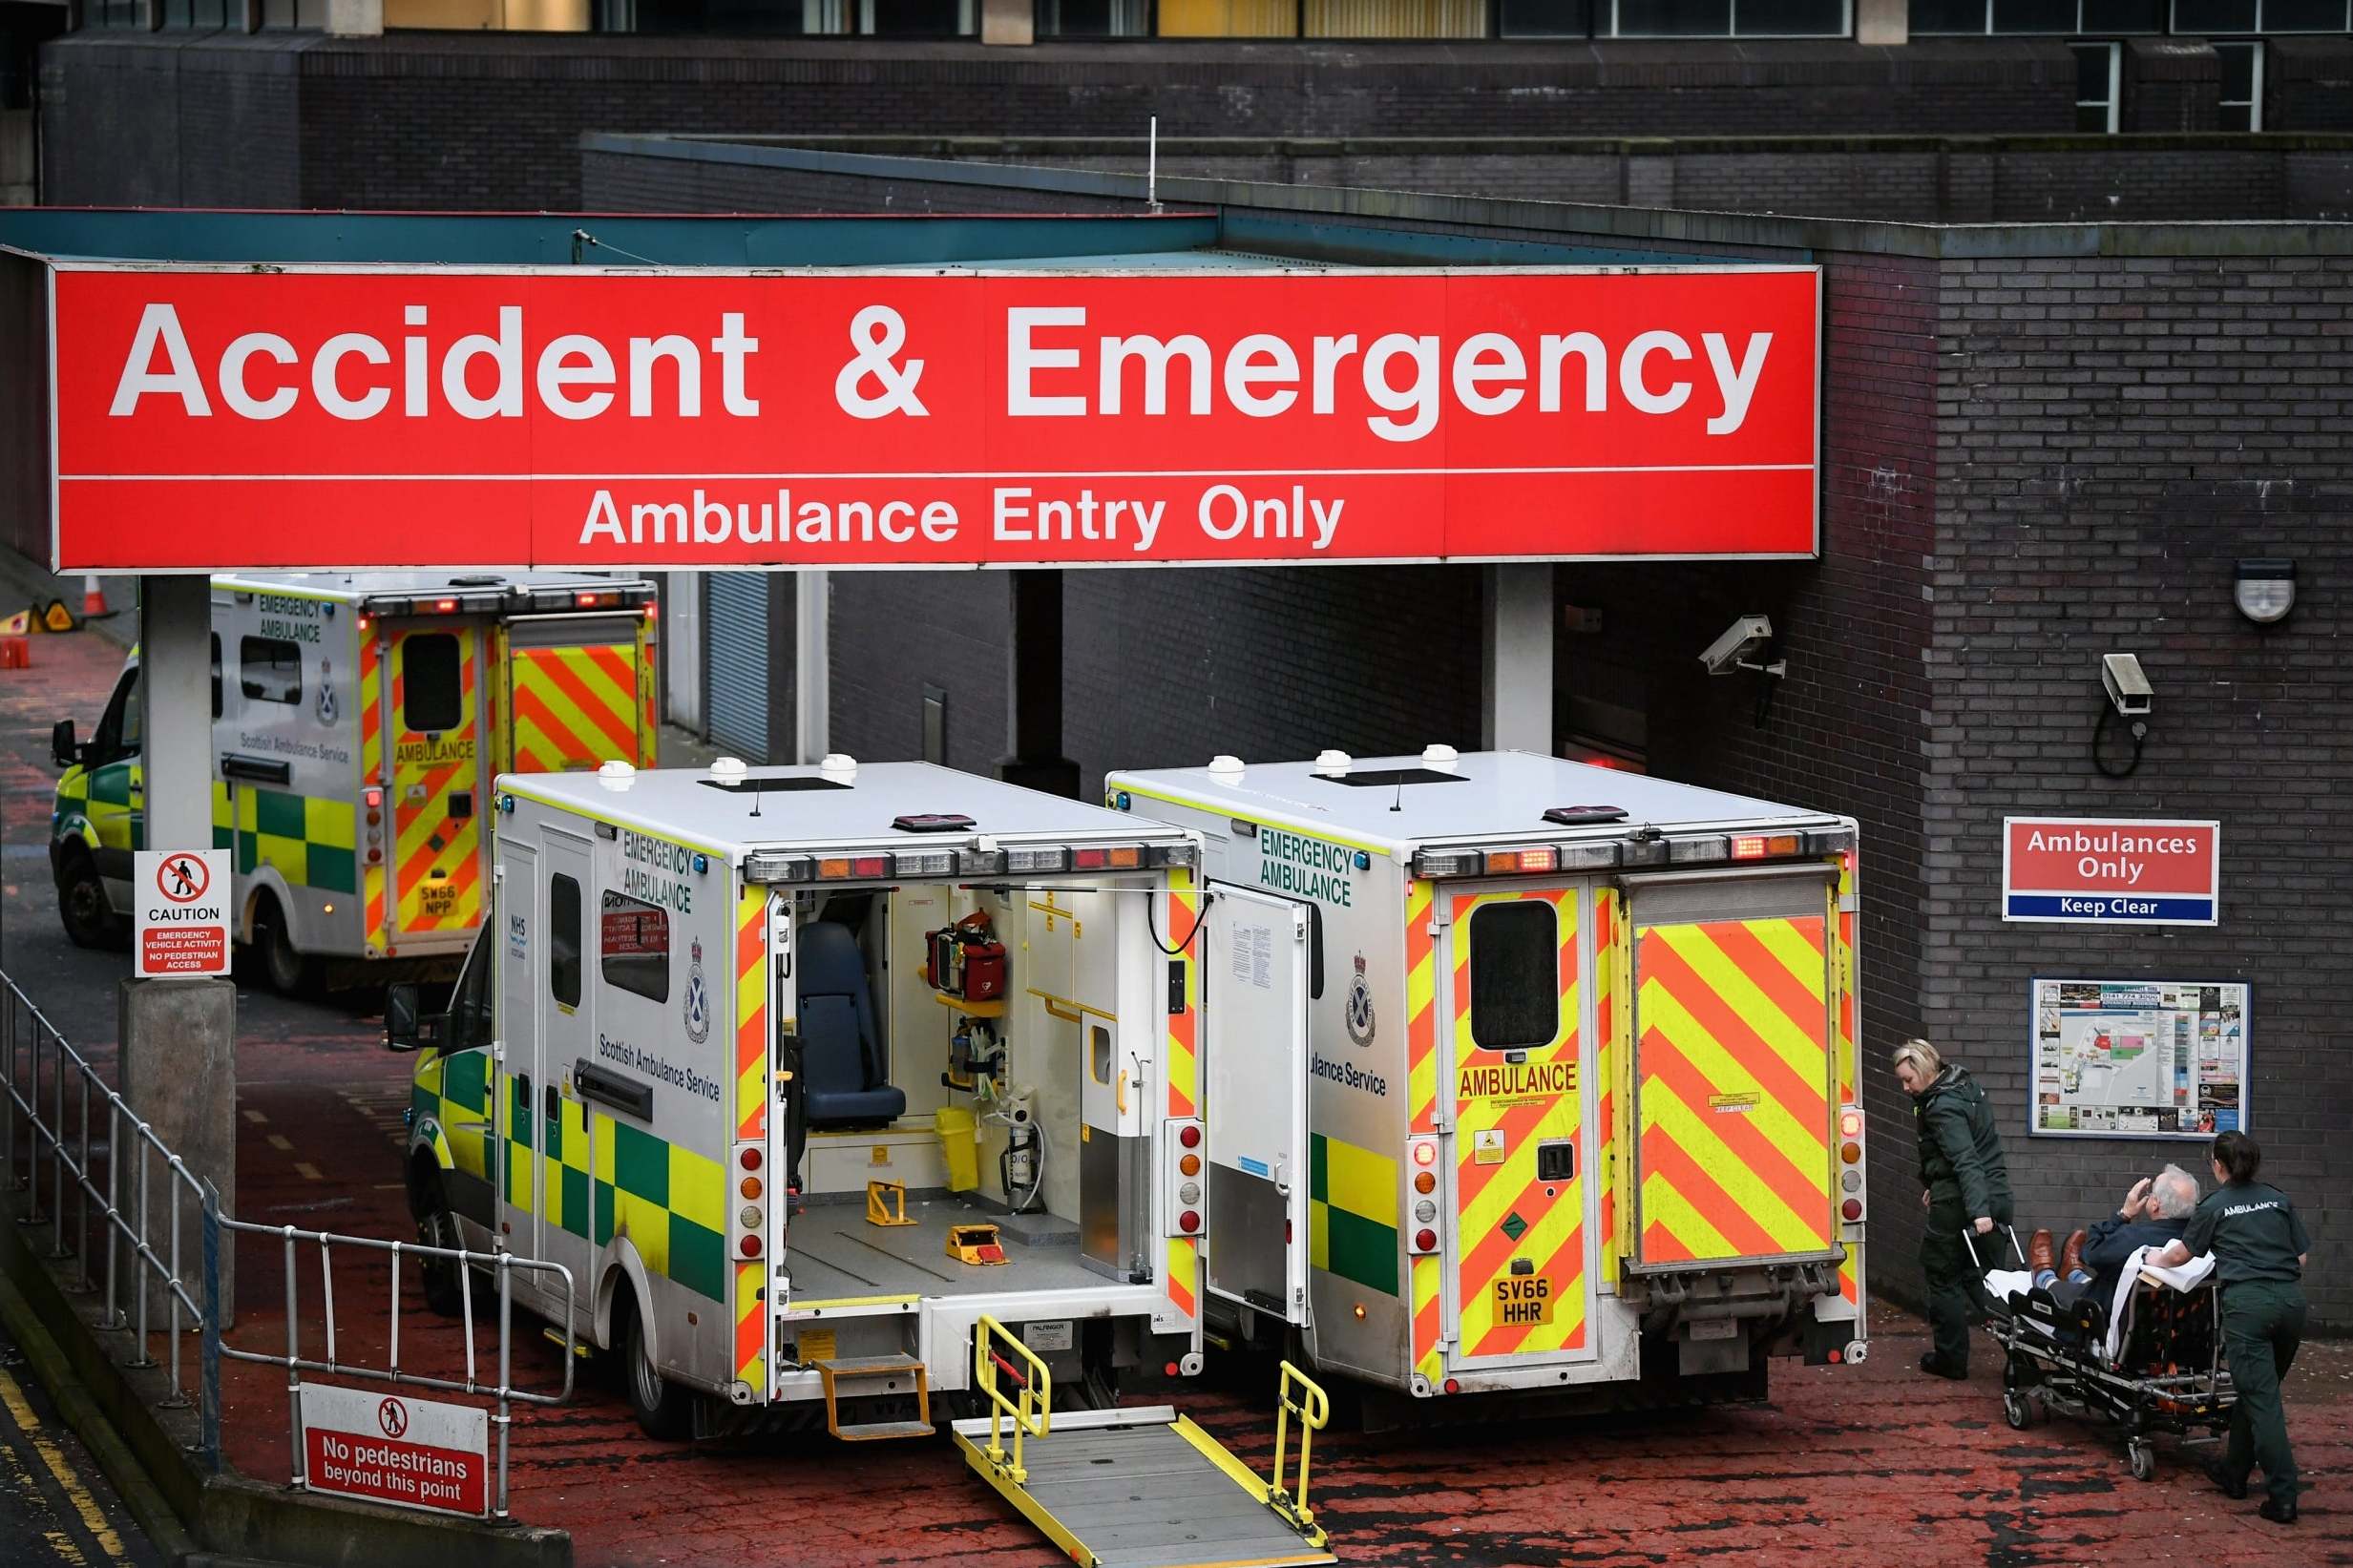 A&E departments have seen their busiest month on record